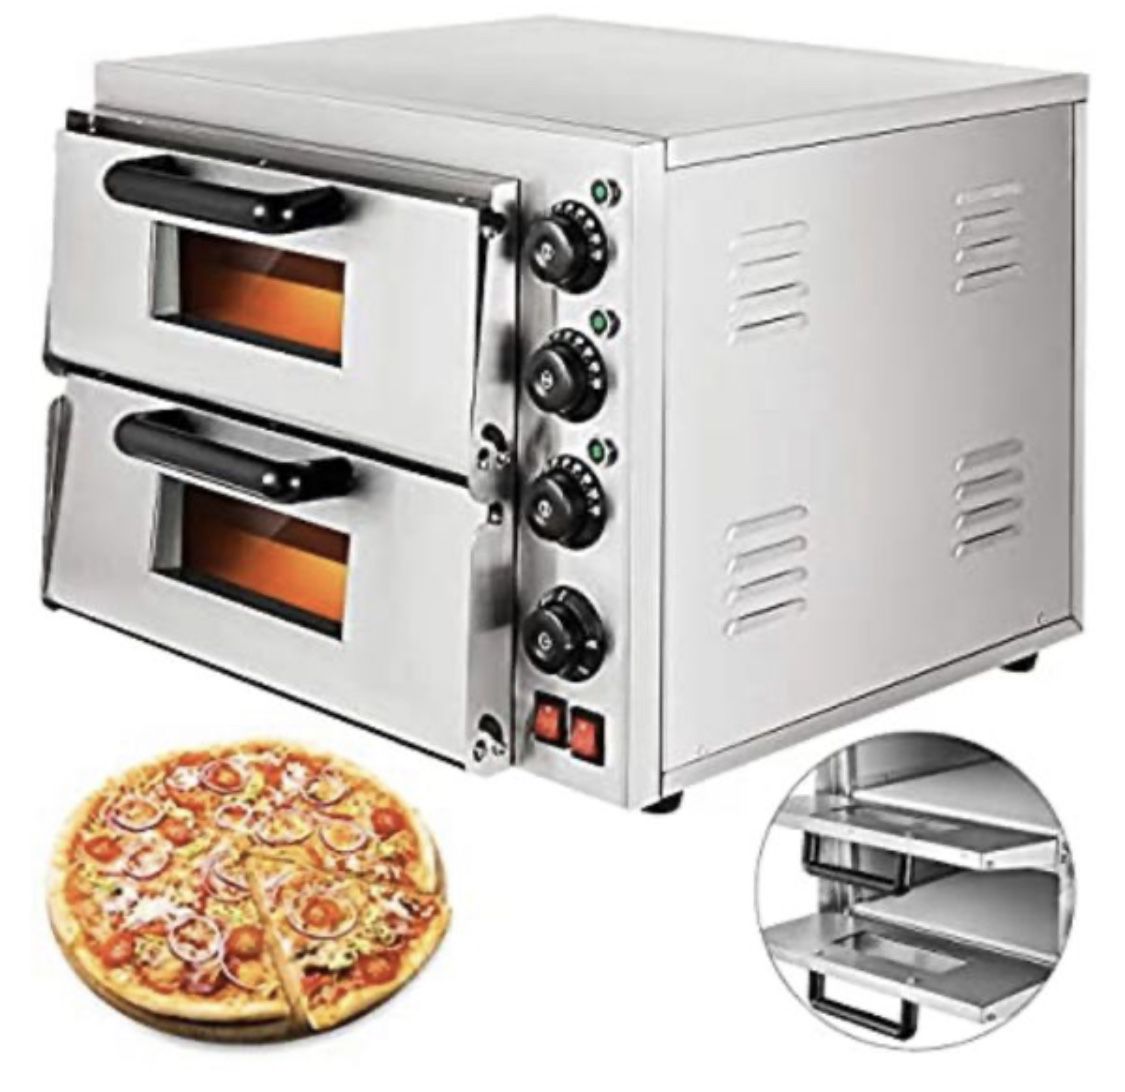 14'' Commercial Pizza Double Oven 3000W Stainless Steel Electric Countertop Multipurpose Oven for Restaurant or Home